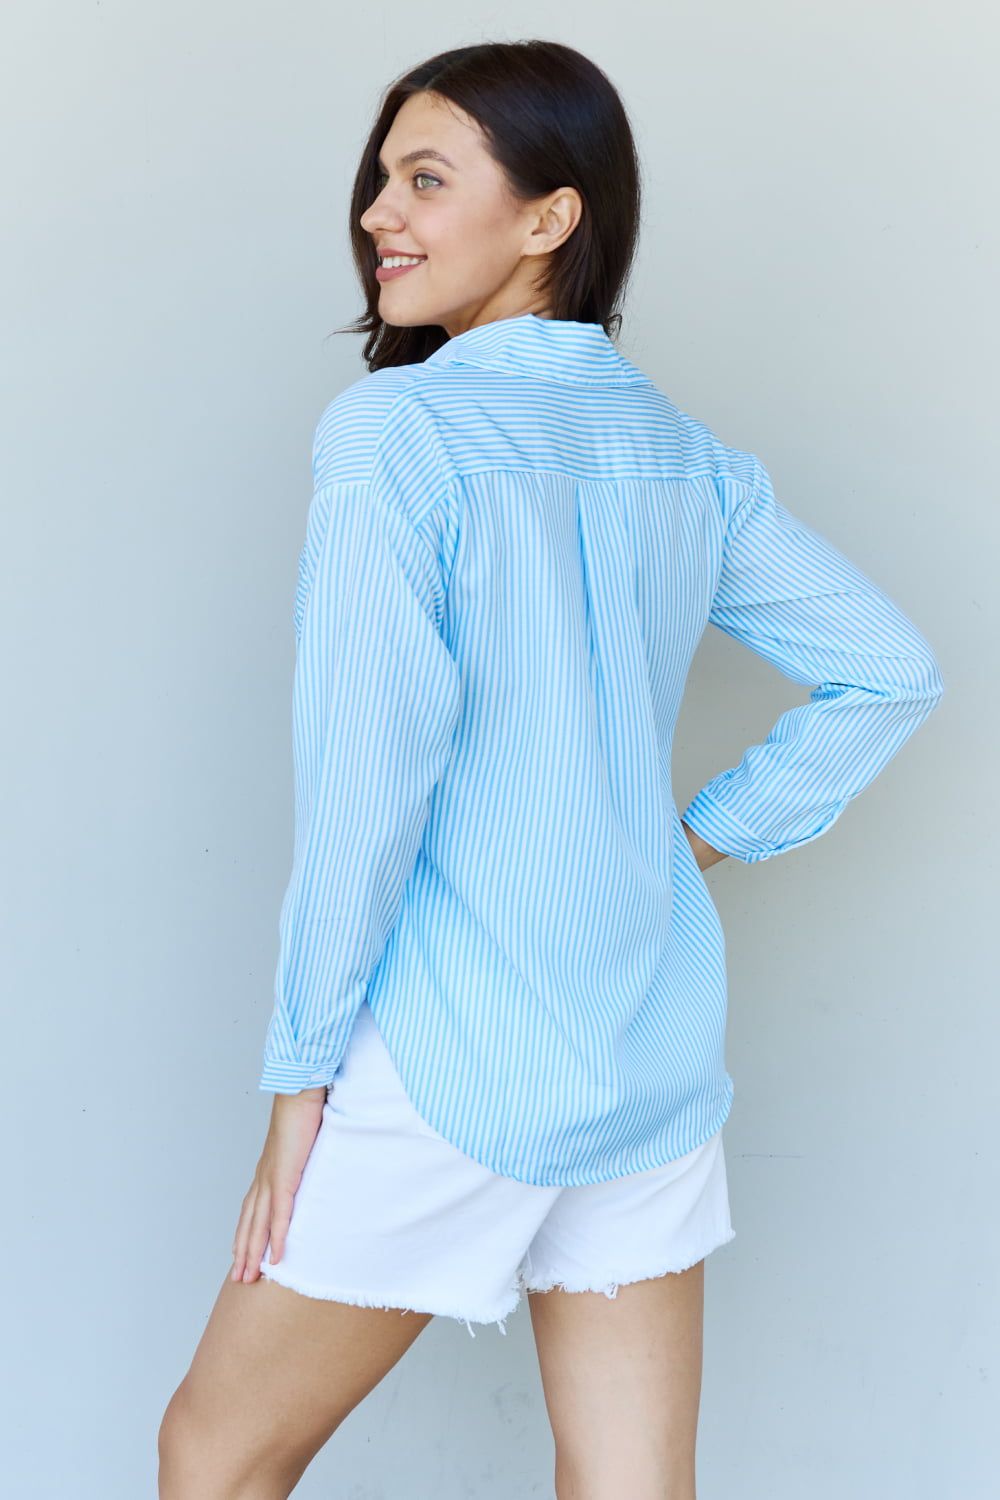 Doublju She Means Business Striped Button Down Shirt Top.